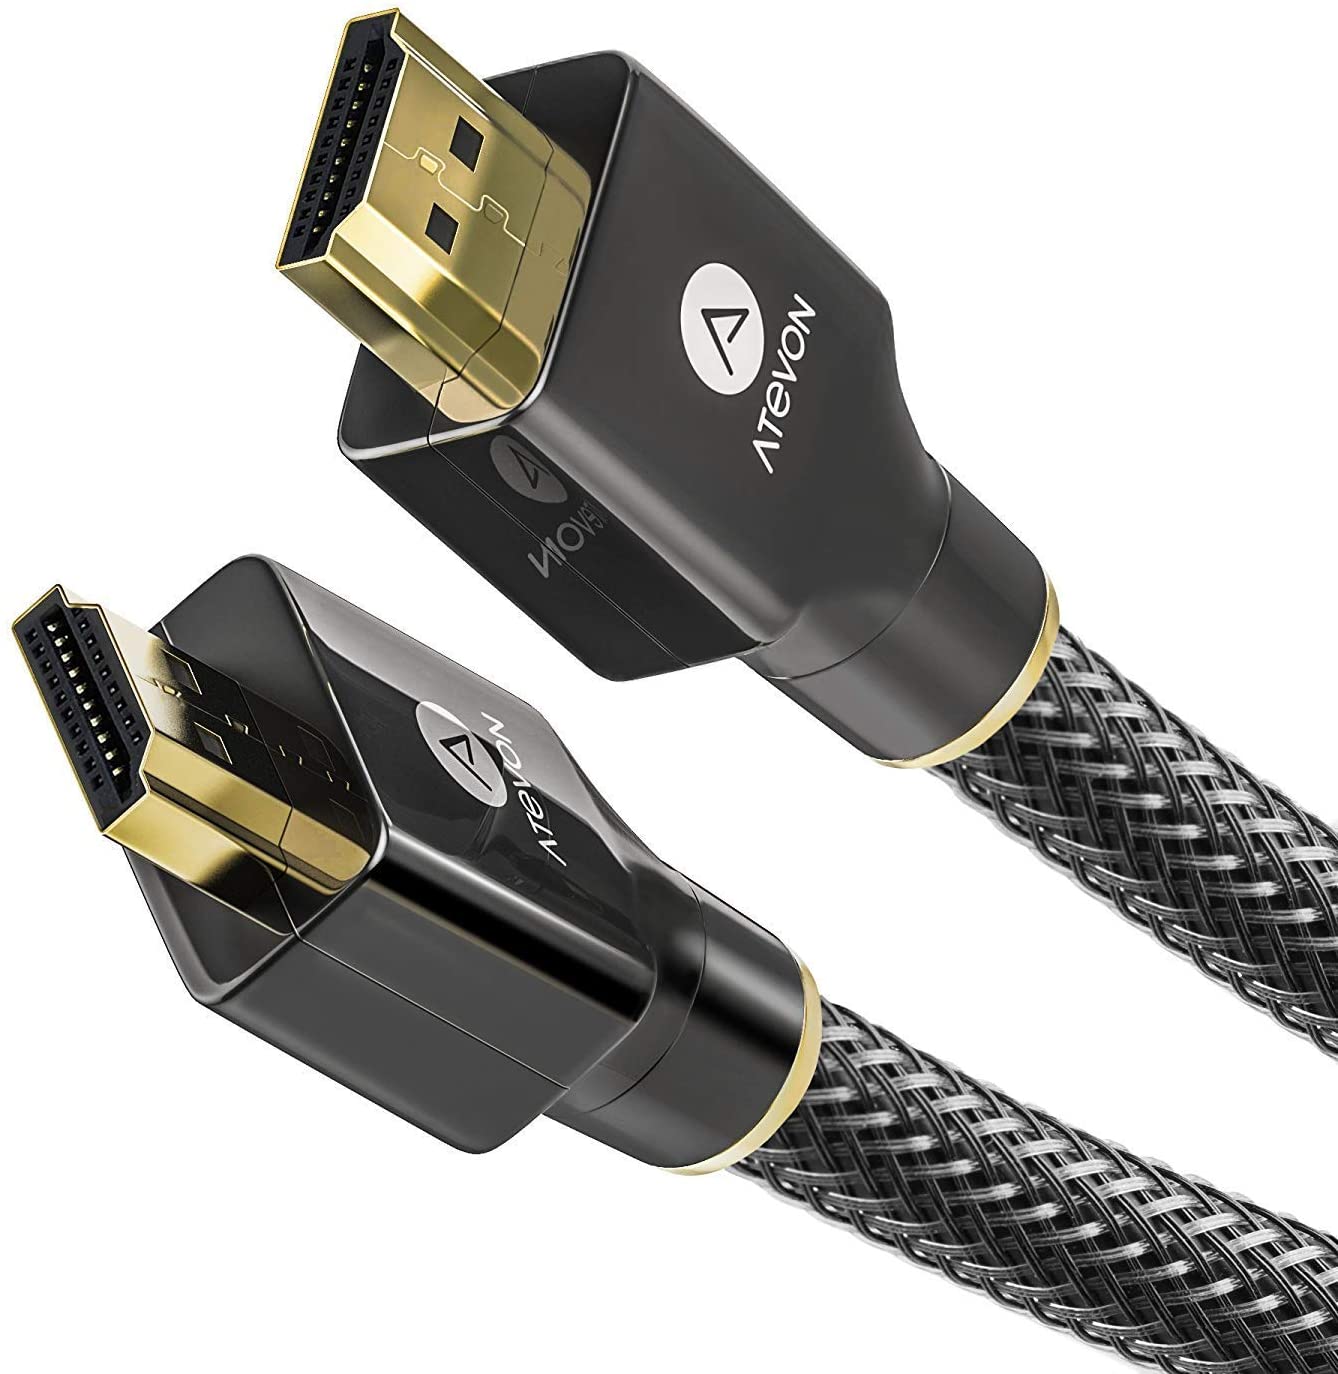 4k Hdmi Cable